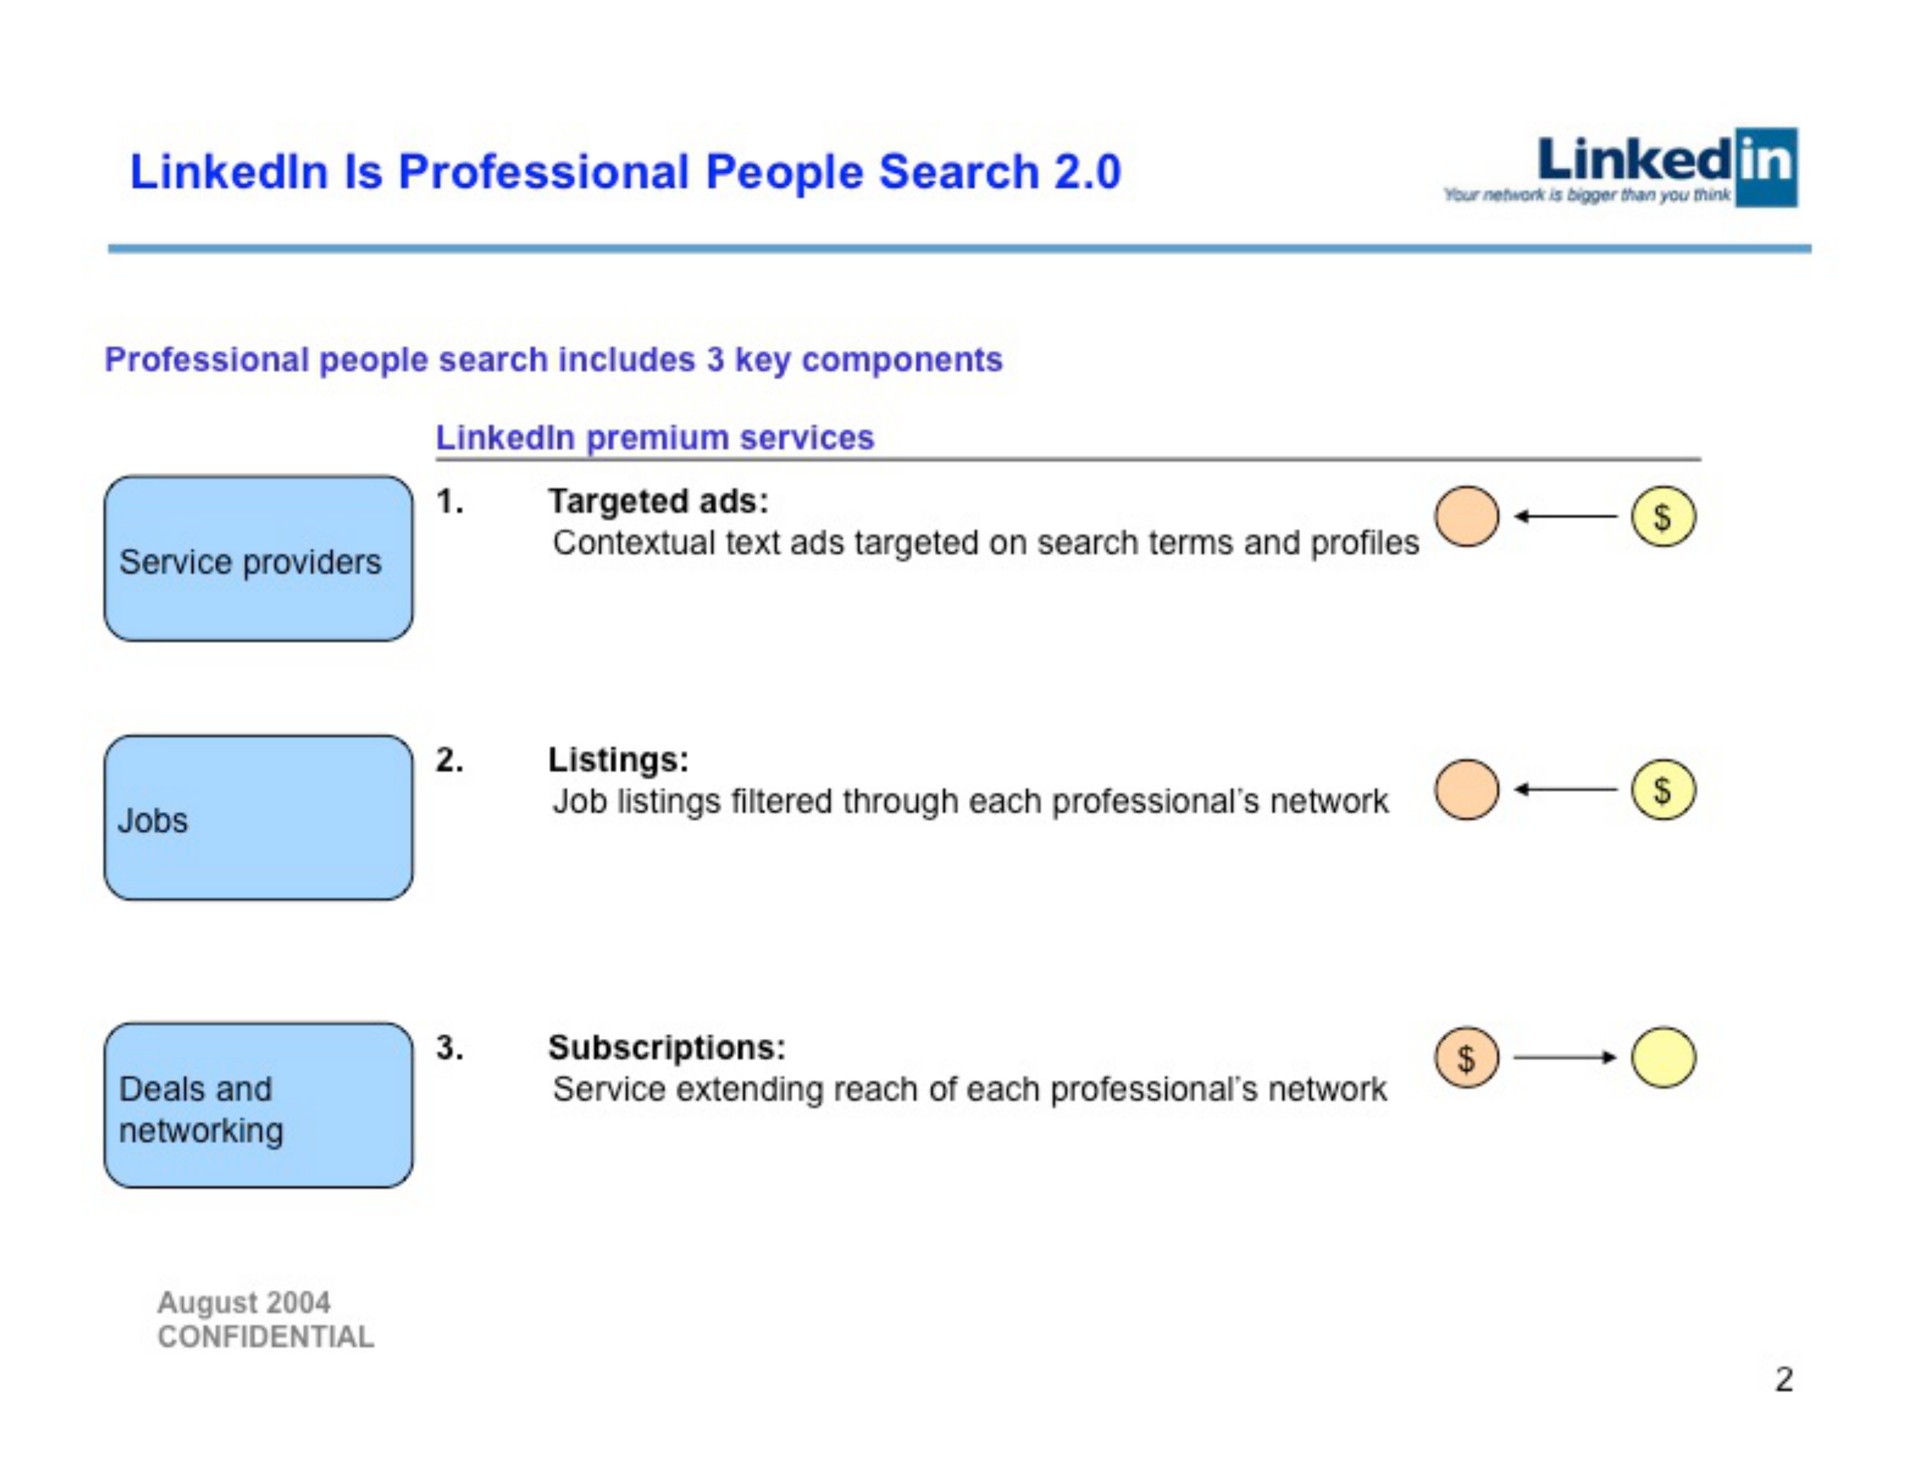 is professional people search linked professional people search includes key components service providers me targeted ads contextual text ads targeted on search terms and profiles listings job listings filtered through each professional network subscriptions service extending reach of each professional network deals and networking | Linkedin